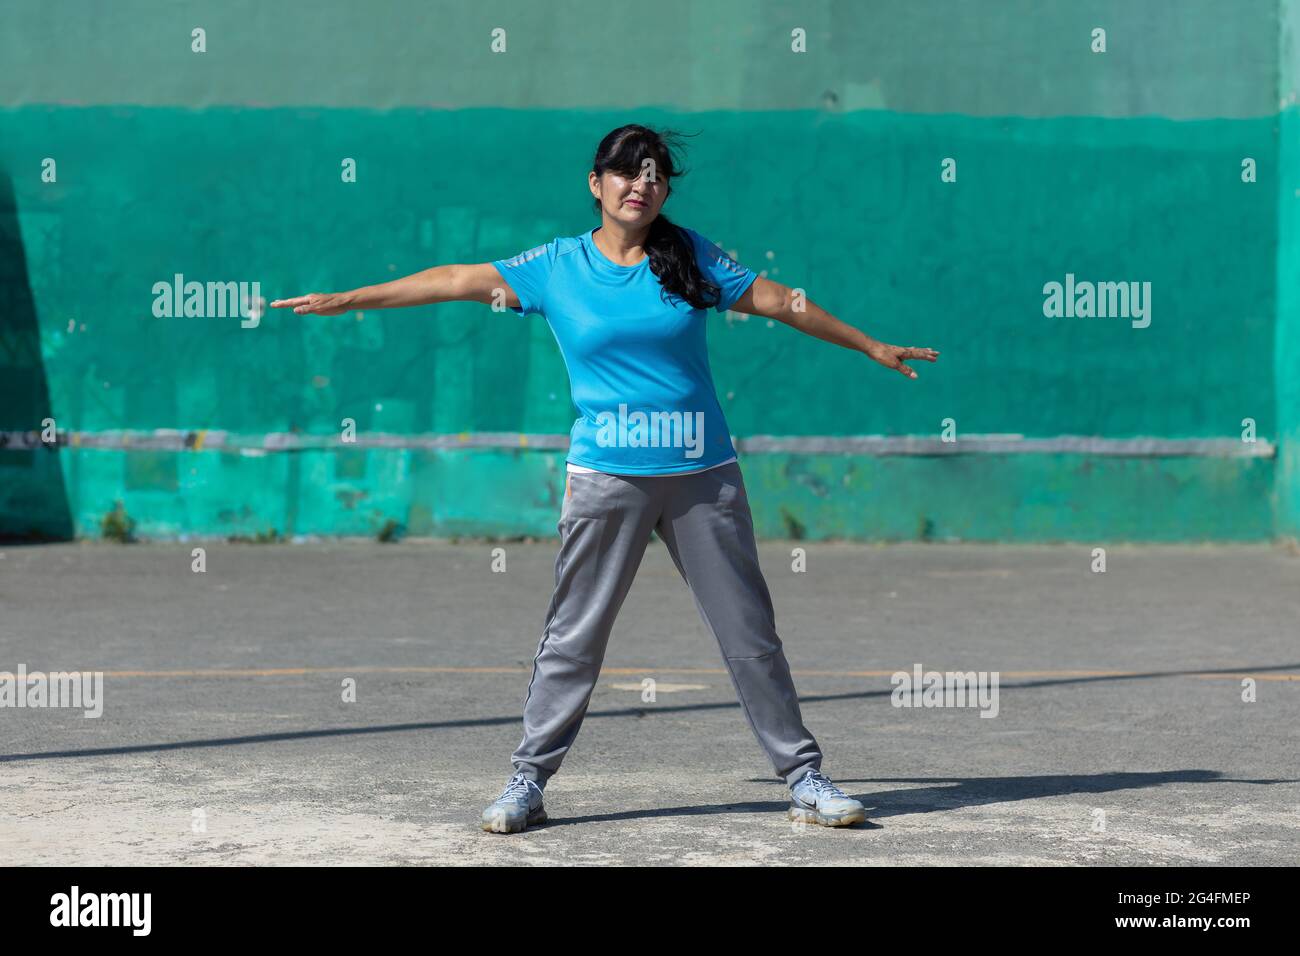 Mexican woman stretching with arms outspread; exercising outdoors Stock Photo